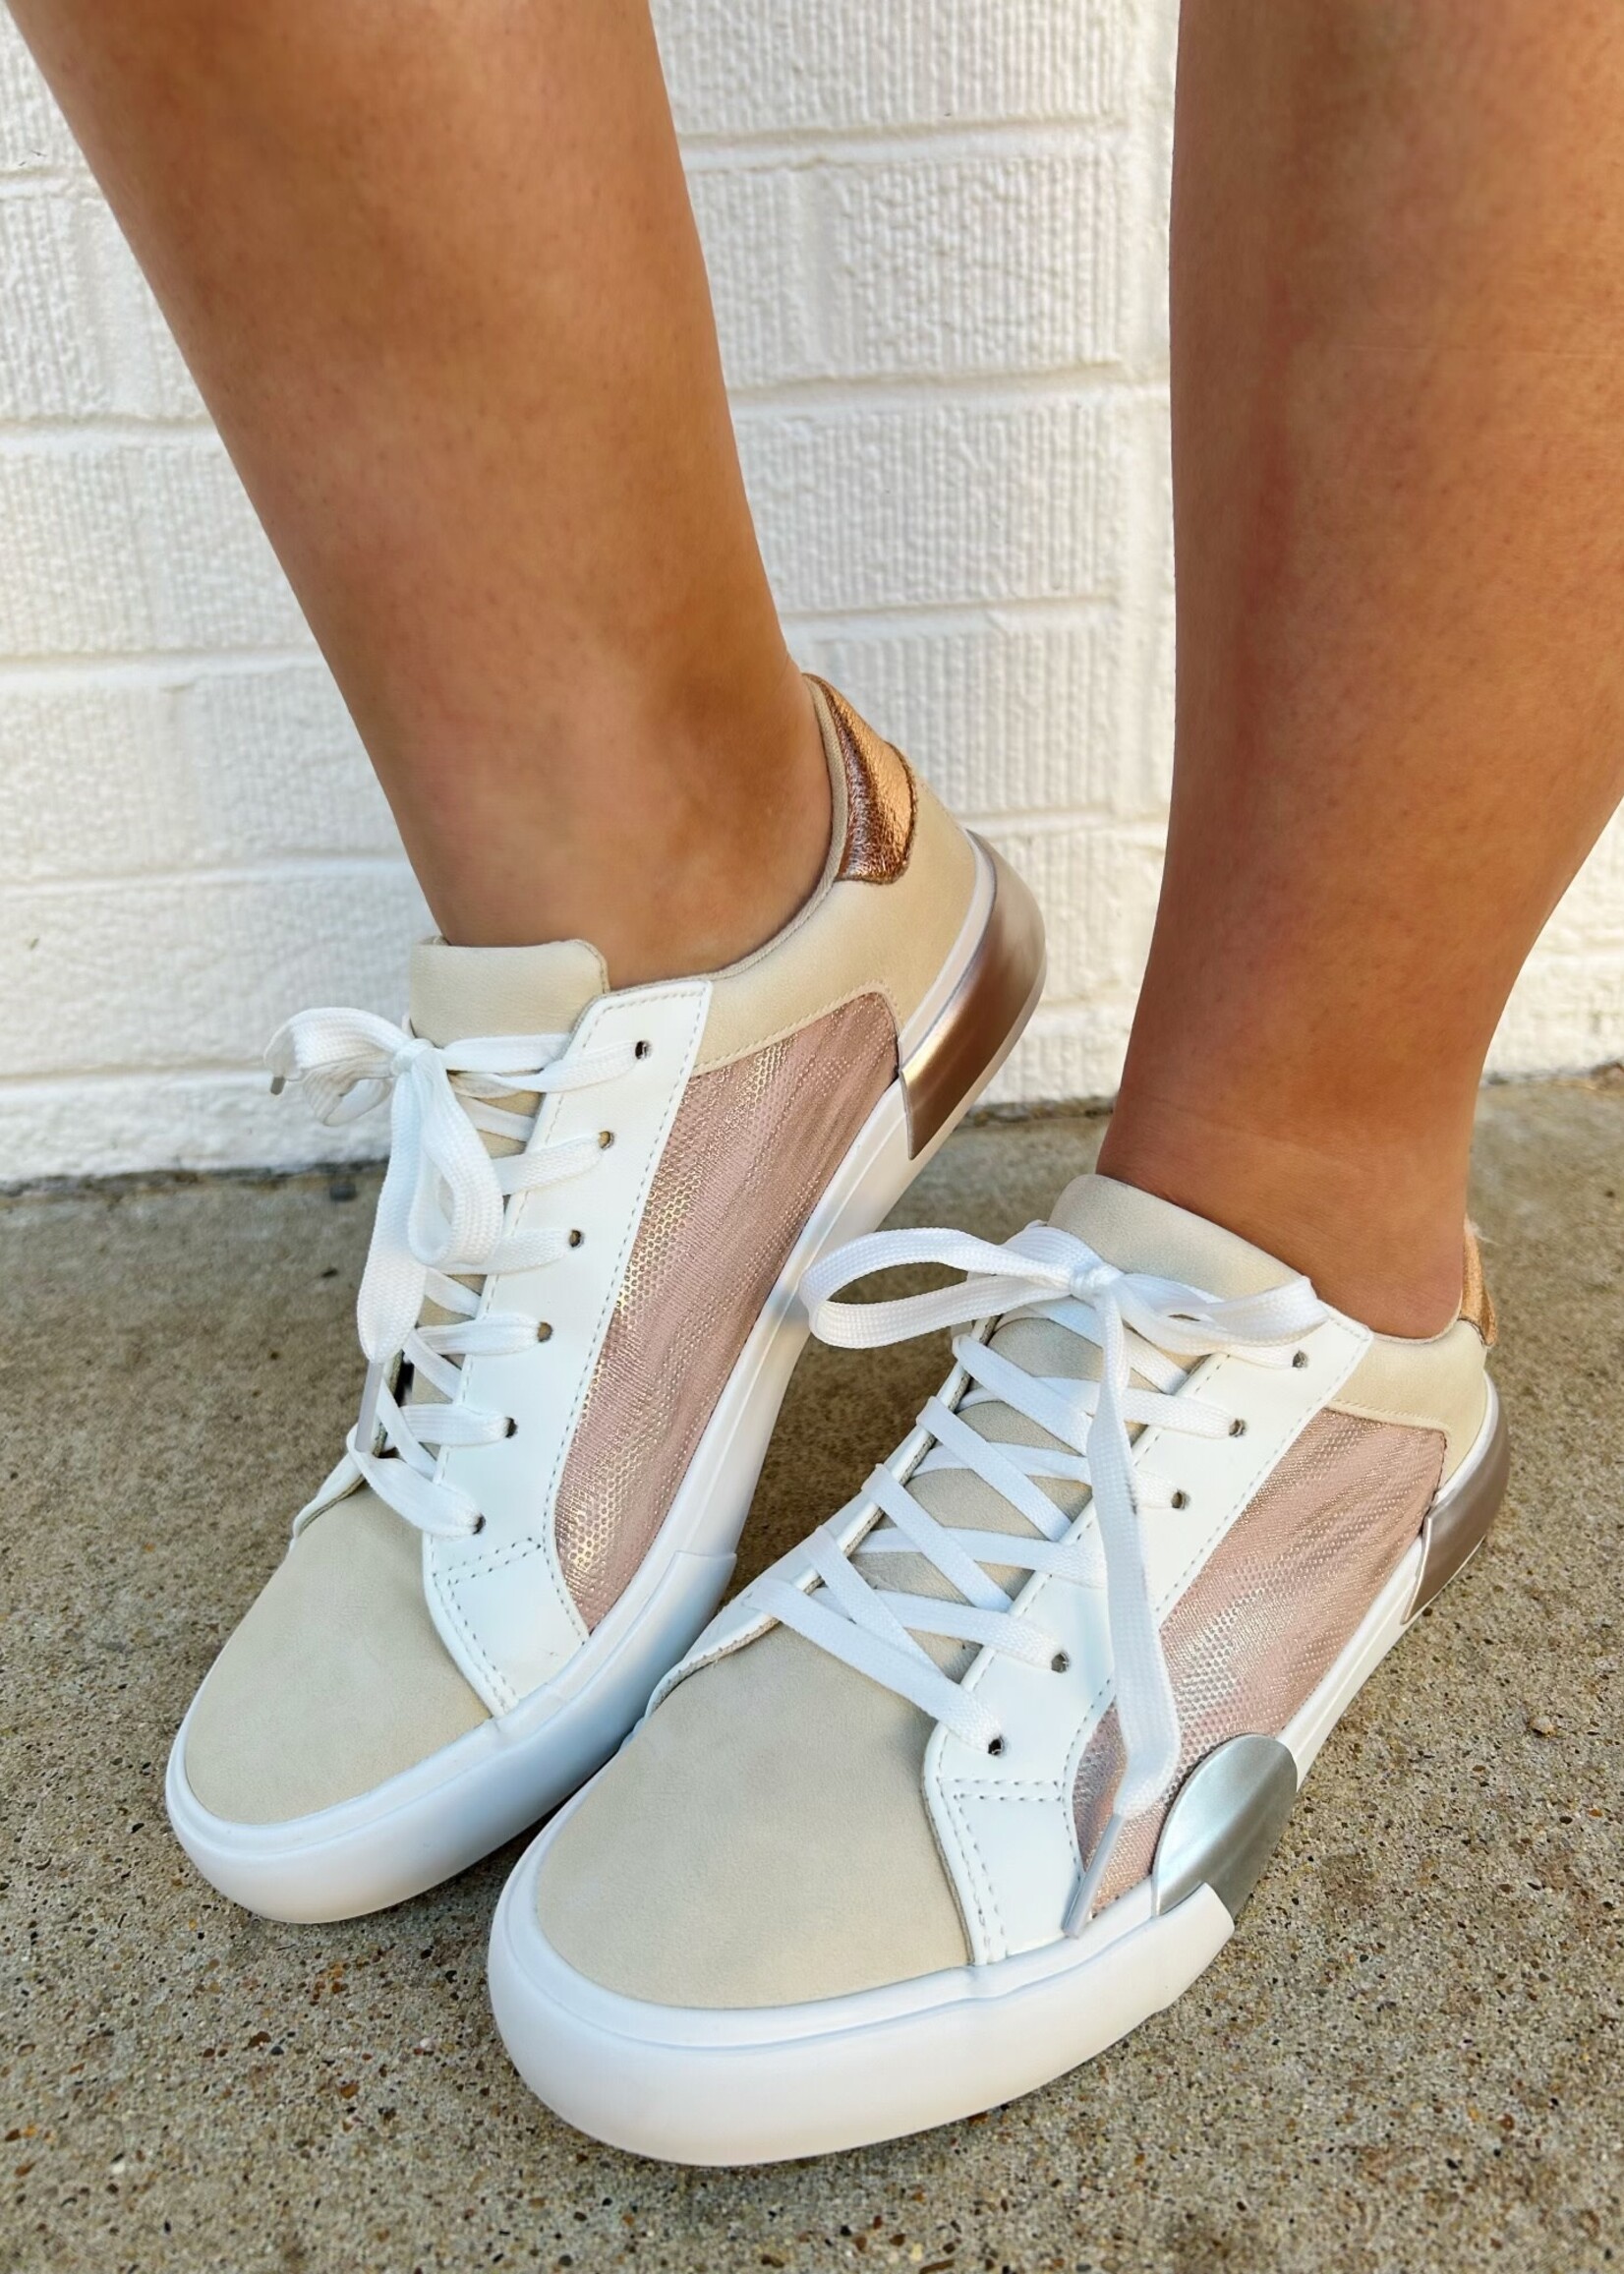 Bloom and Company Rose Gold Solmate Sneakers